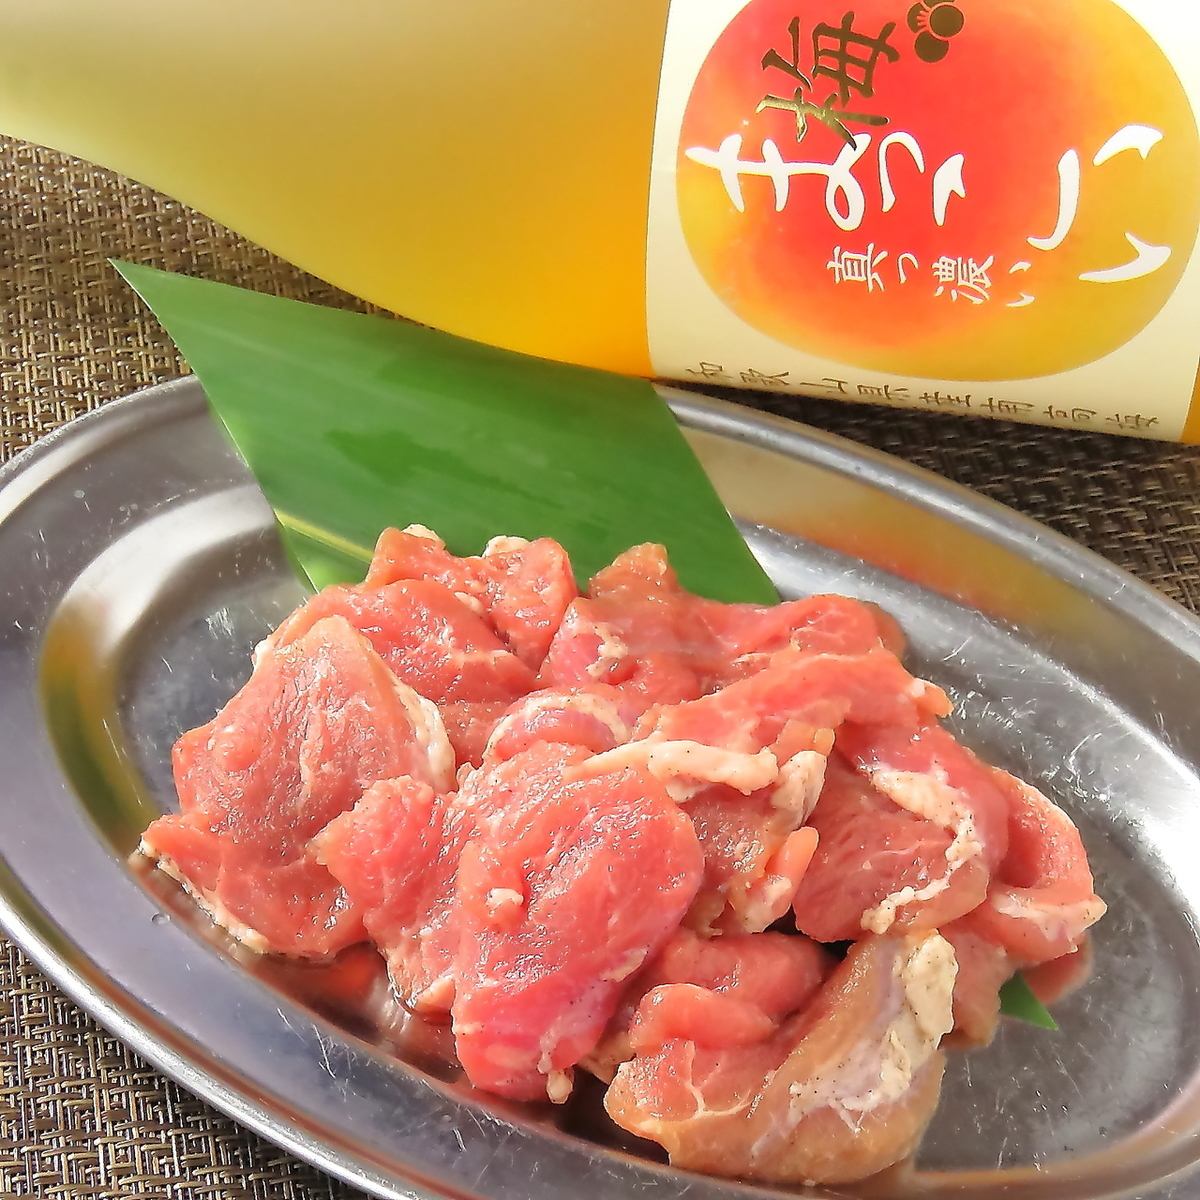 Limited quantity! Specialty black pork jaw meat from Kagoshima prefecture